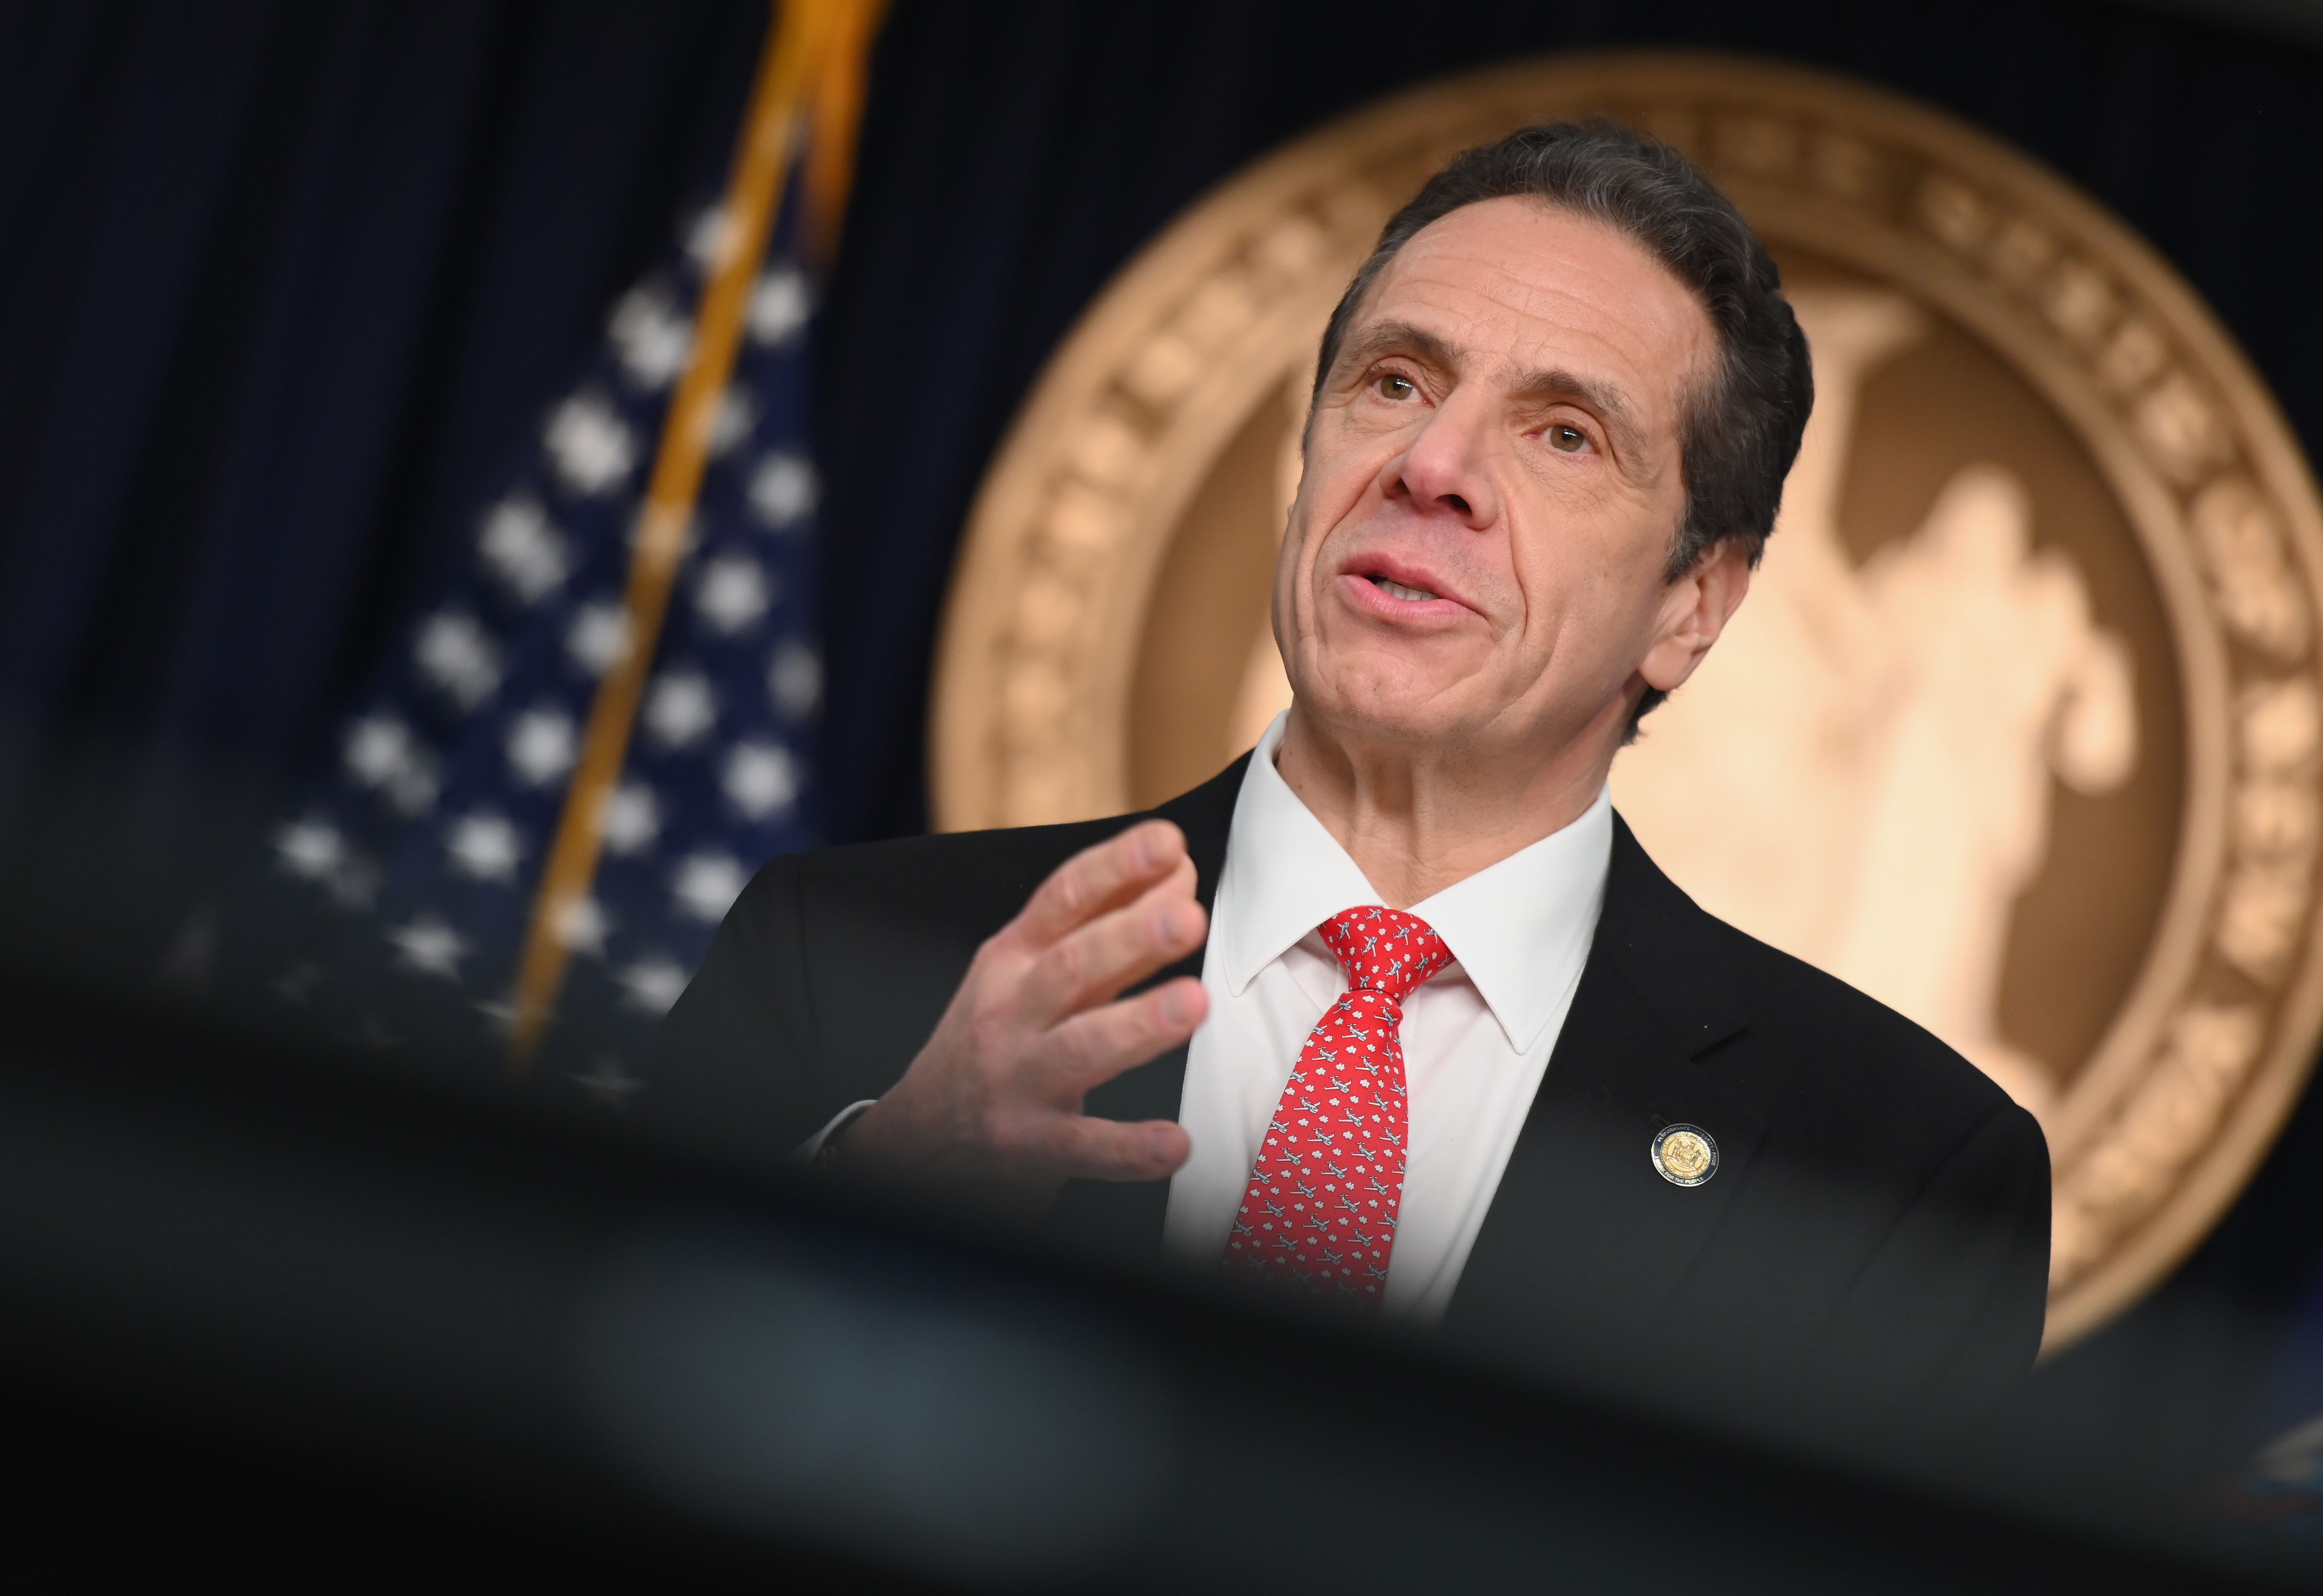 New York Governor Andrew Cuomo speaks during a press conference on Monday, March 2, in New York City.